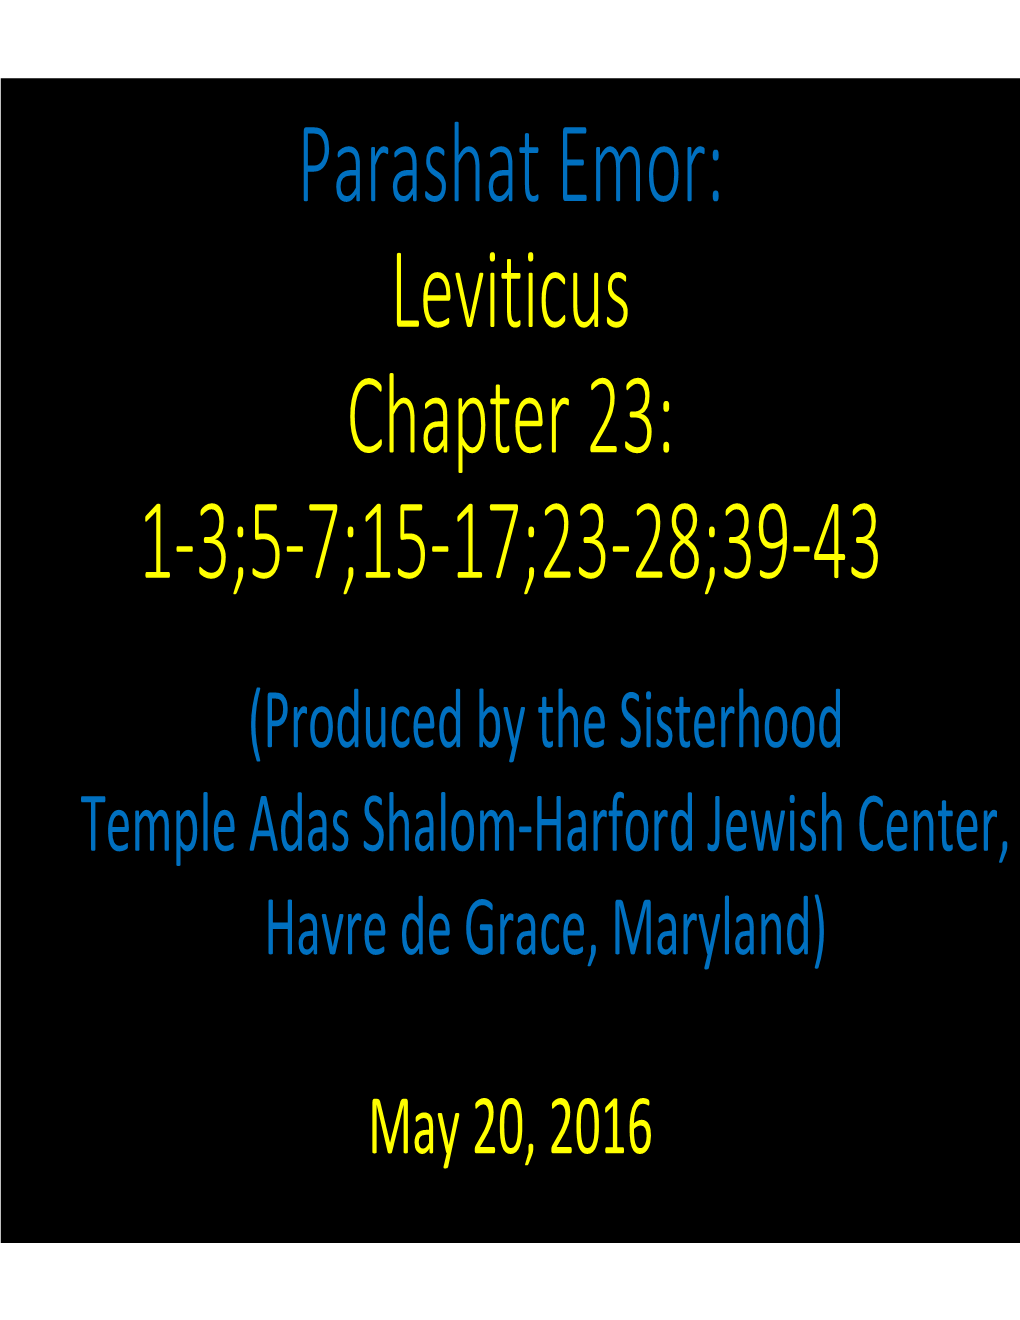 Parashat Emor: Leviticus Chapter 23: 1-3;5-7;15-17;23-28;39-43 (Produced by the Sisterhood Temple Adas Shalom-Harford Jewish Center, Havre De Grace, Maryland)